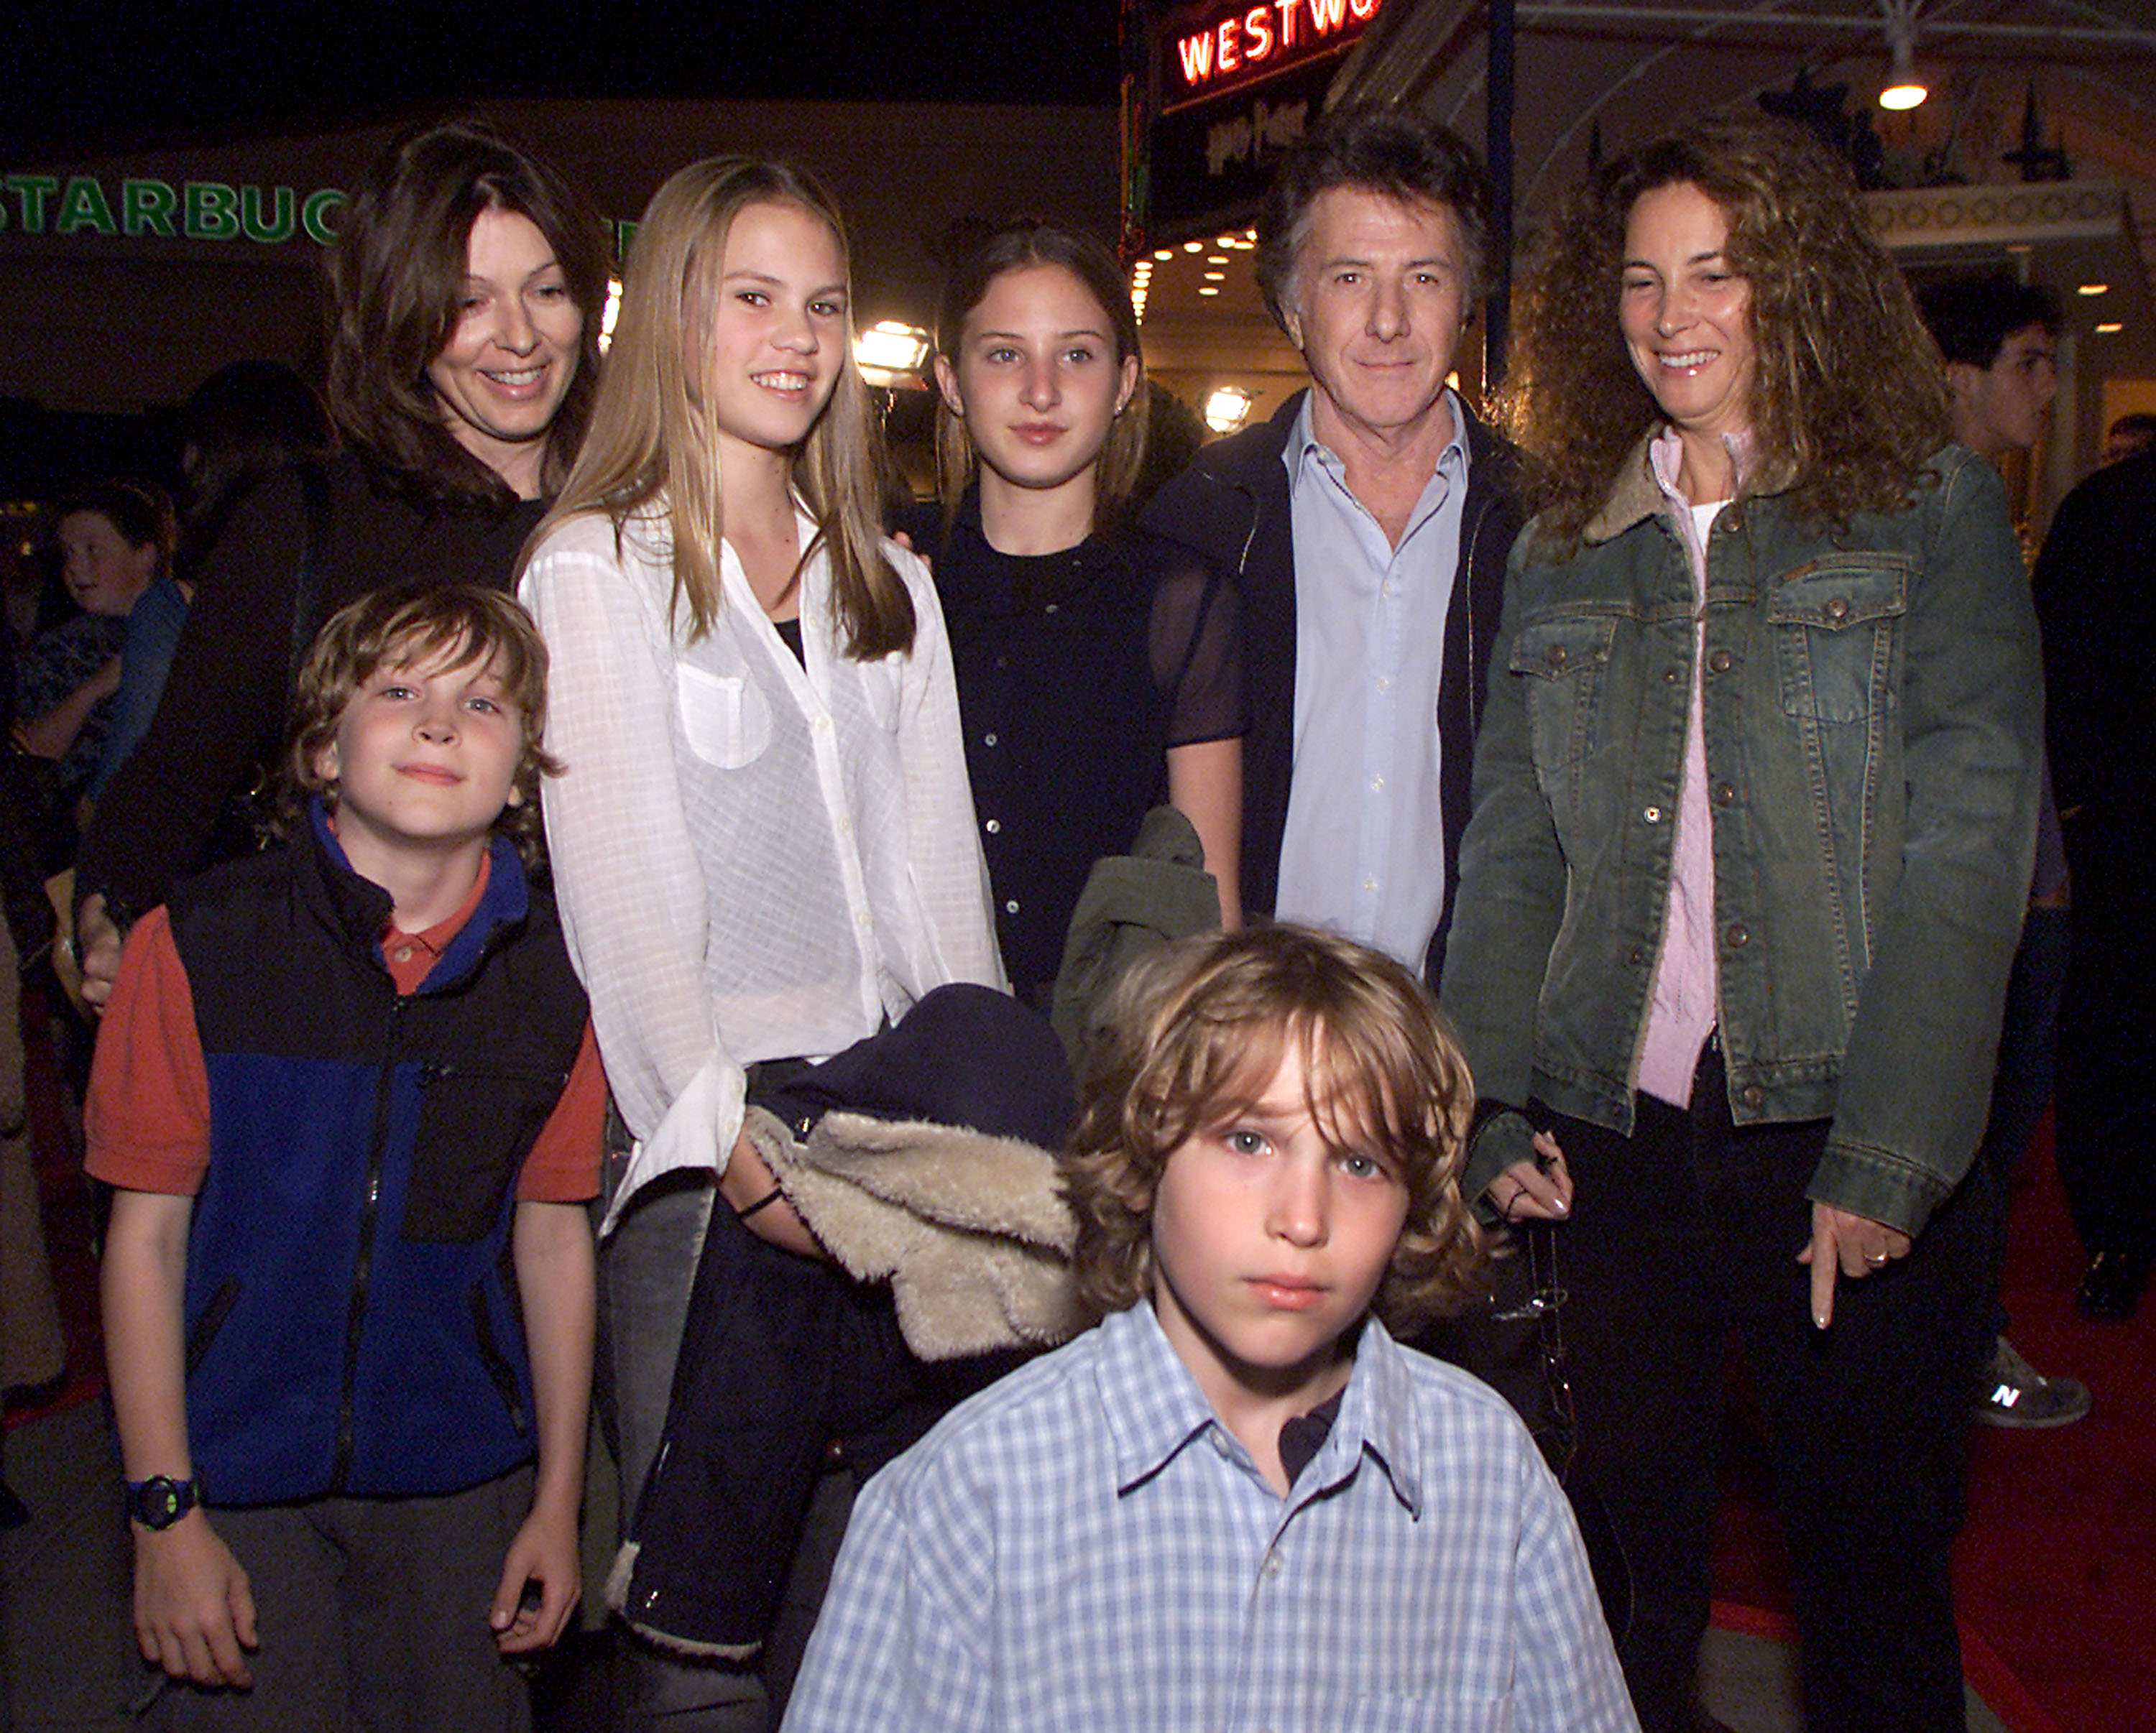 The woman, the actor, their kids, and friends at the premiere of "Harry Potter and the Sorcerer's Stone" in Los Angeles, California on November 14, 2001. | Source: Getty Images